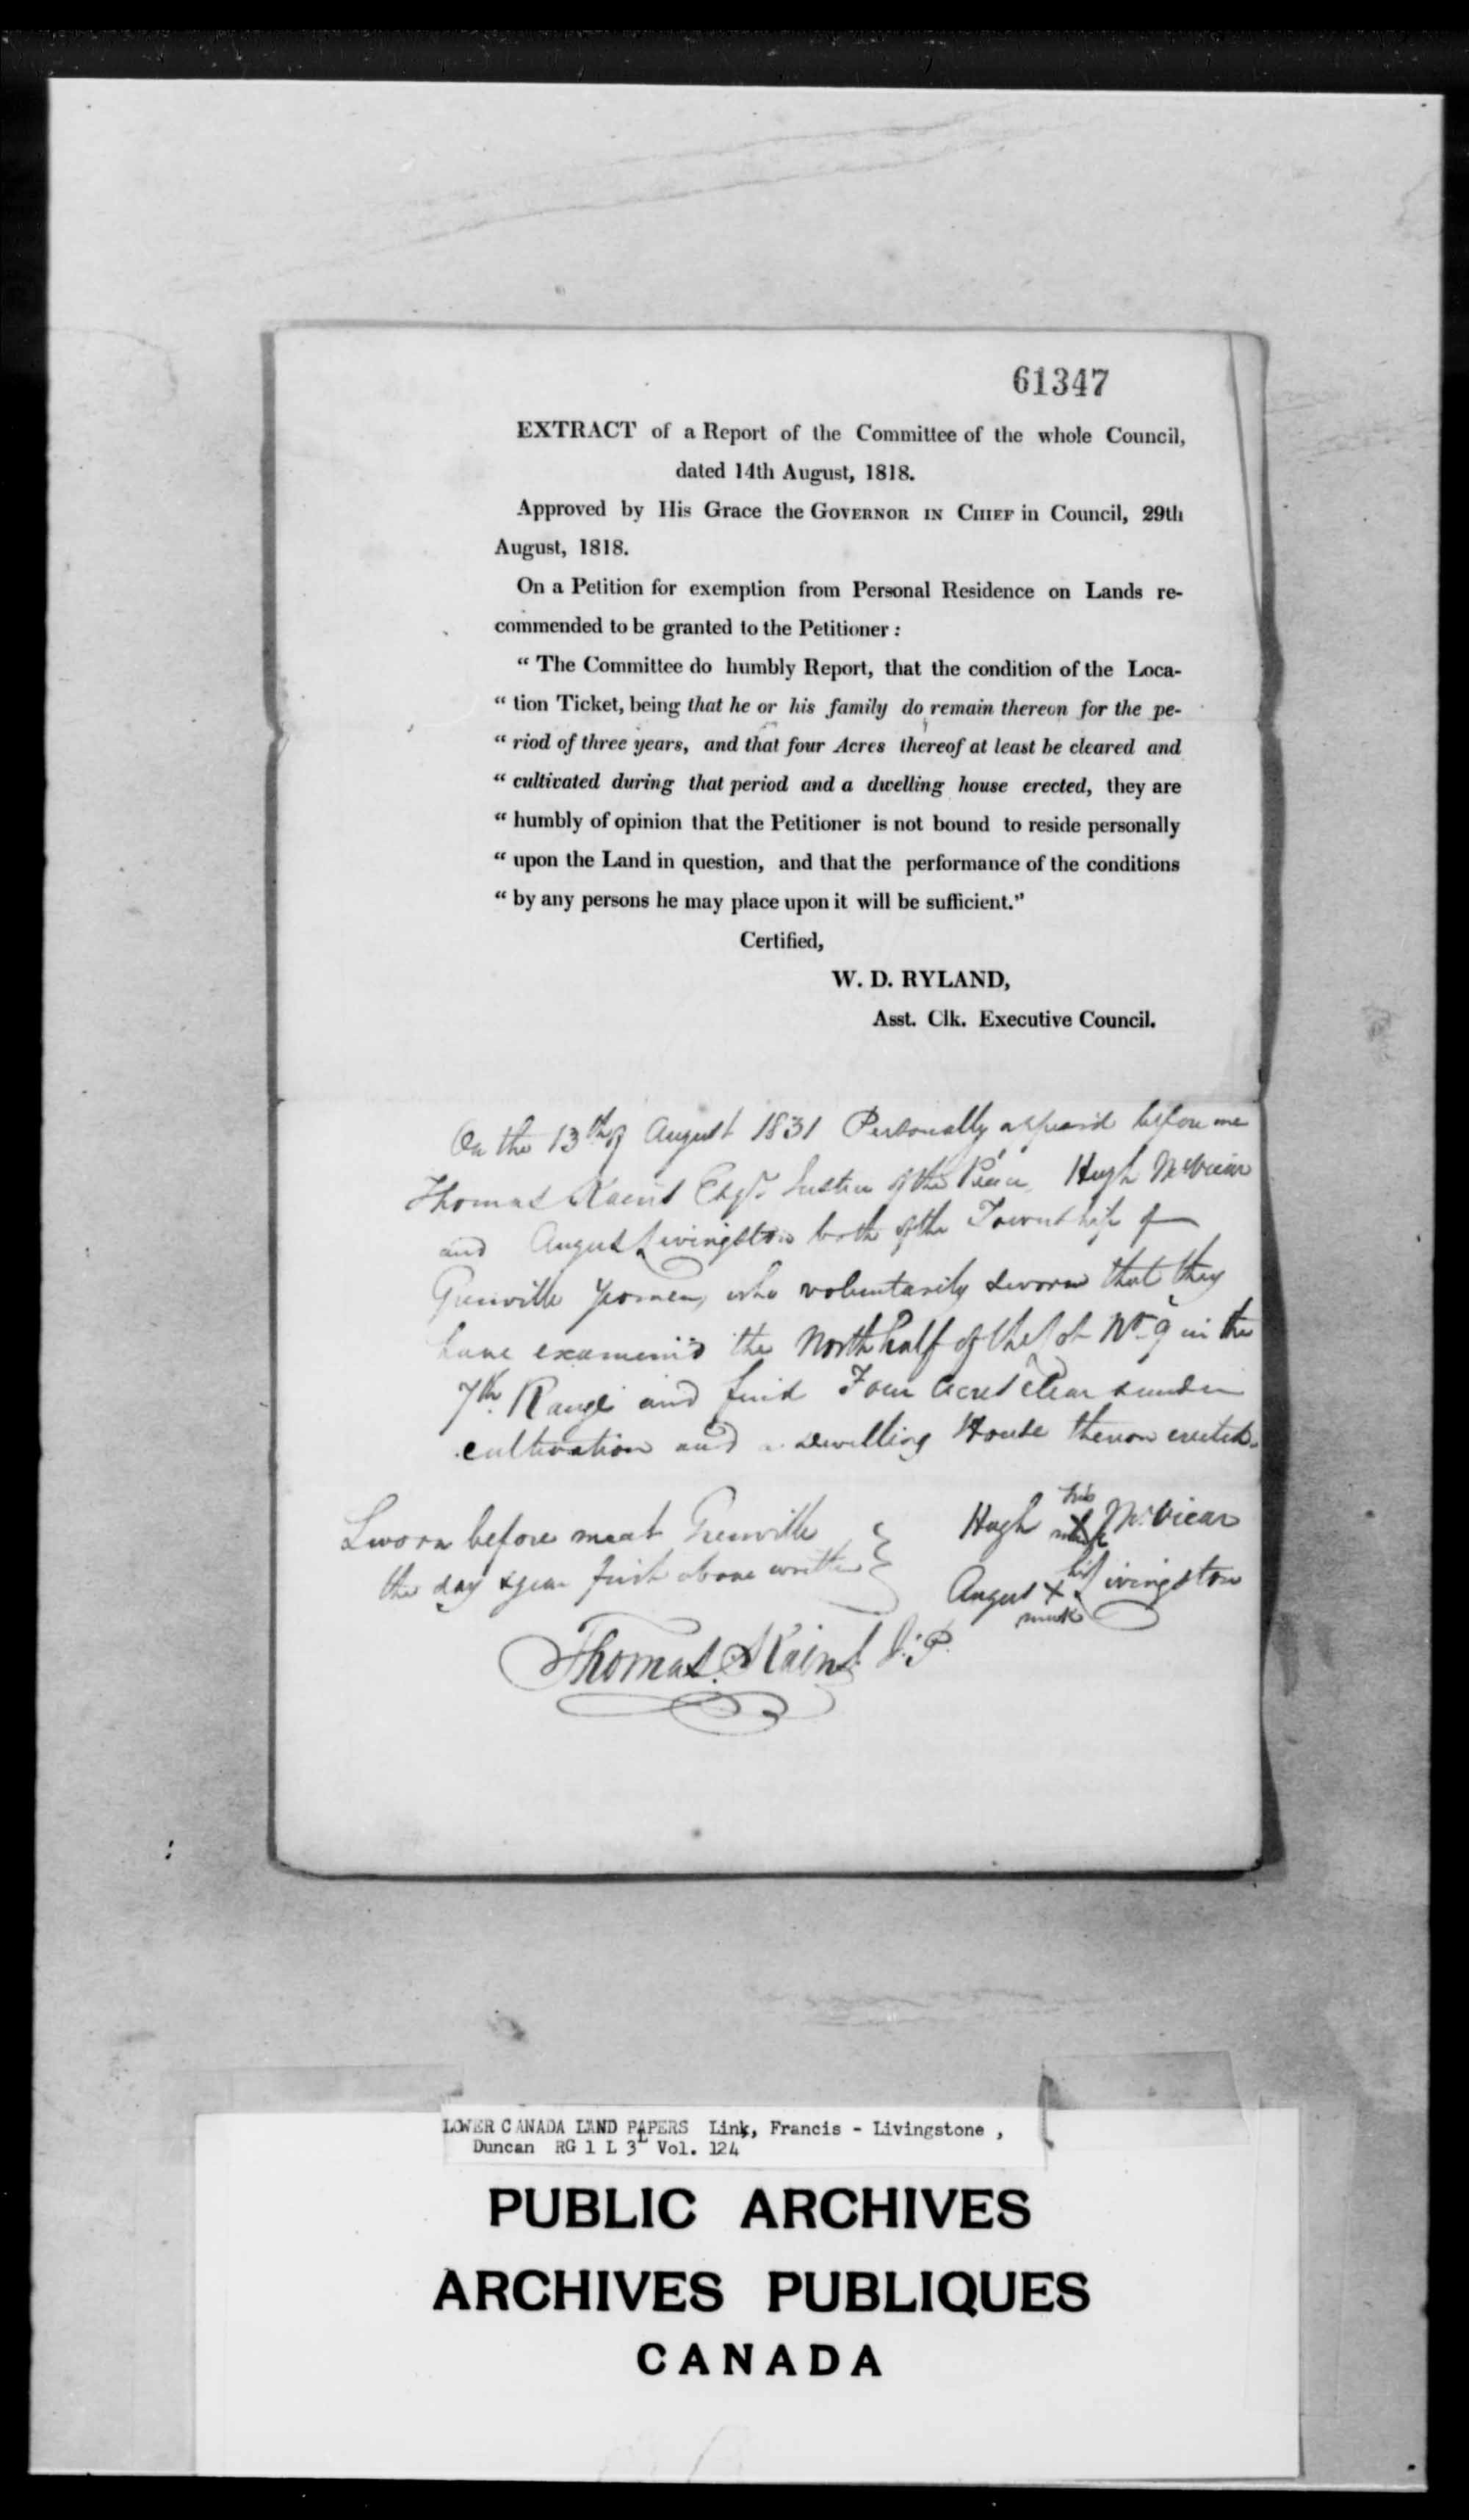 Digitized page of  for Image No.: e008706196